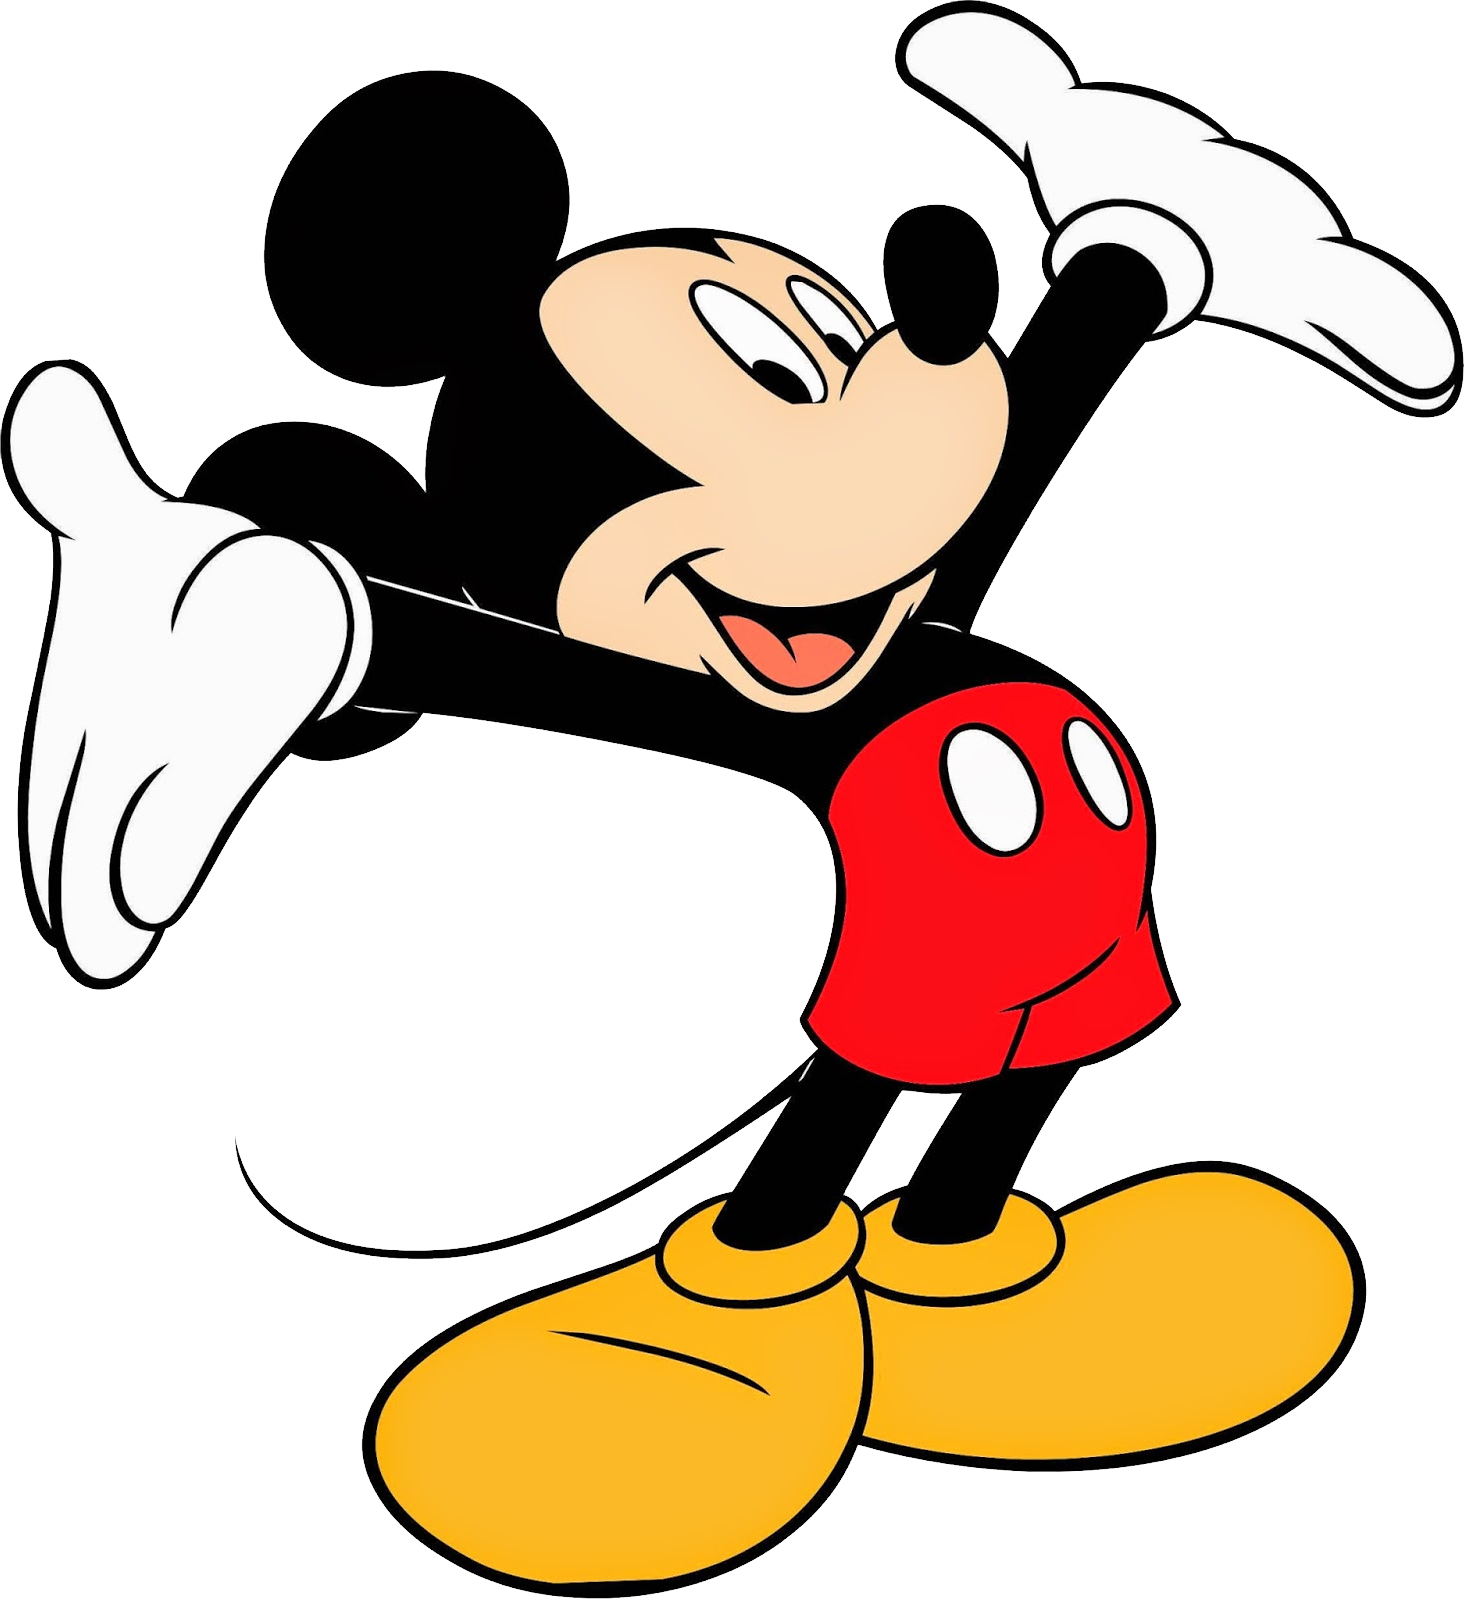 Mickey Mouse Free PNG Images, Mickey Cartoon Characters - Free